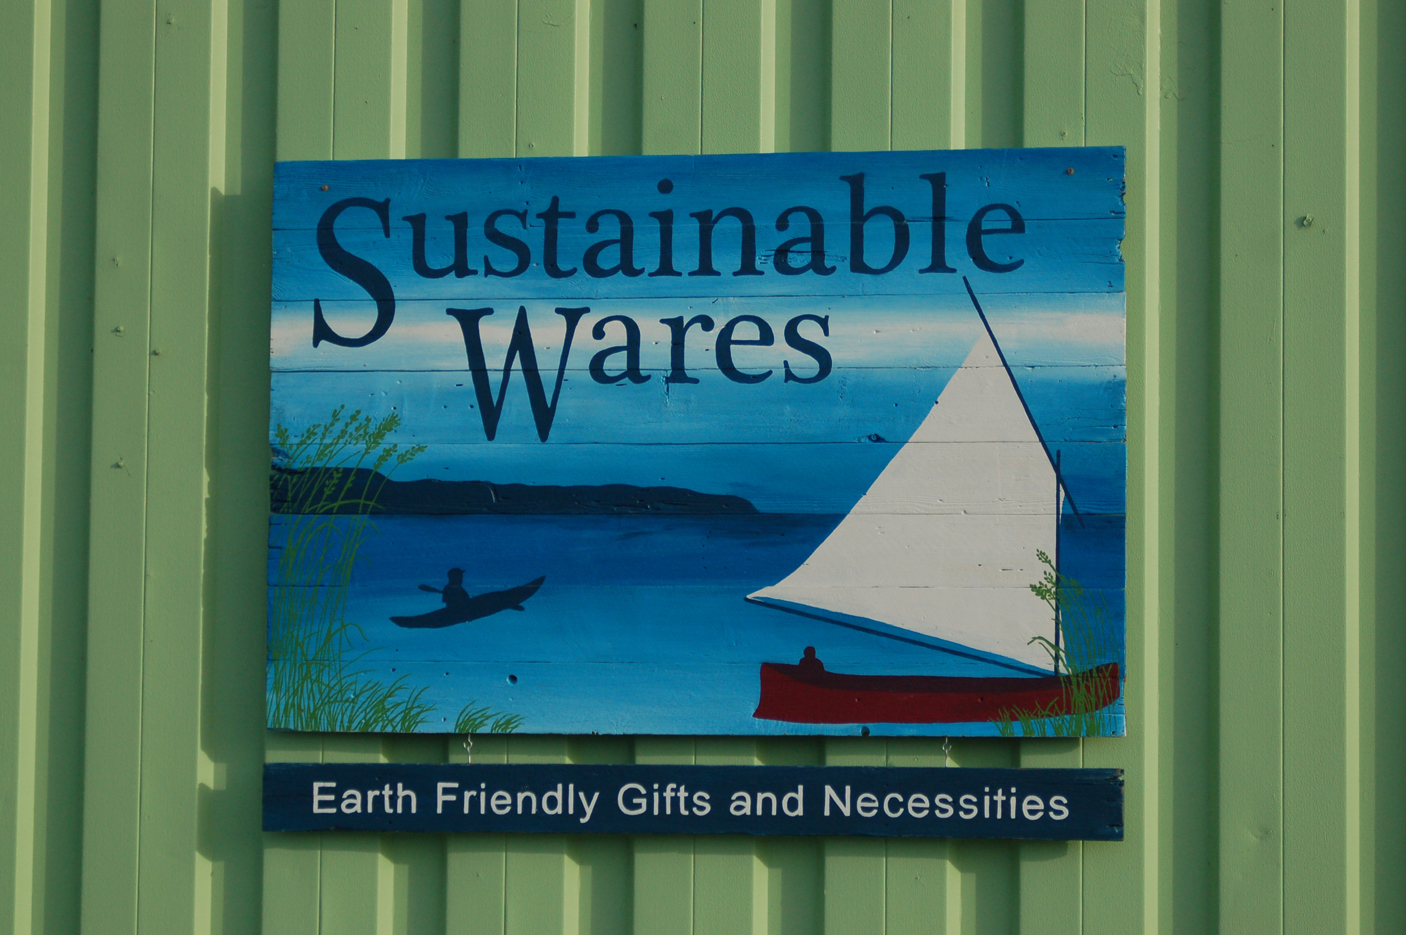 The Sustainable Wares sign is made from recycled wood and painted by Tracy Early and Tracy Hansen of Lost Things Design.-Photo by Michael Armstrong, Homer News